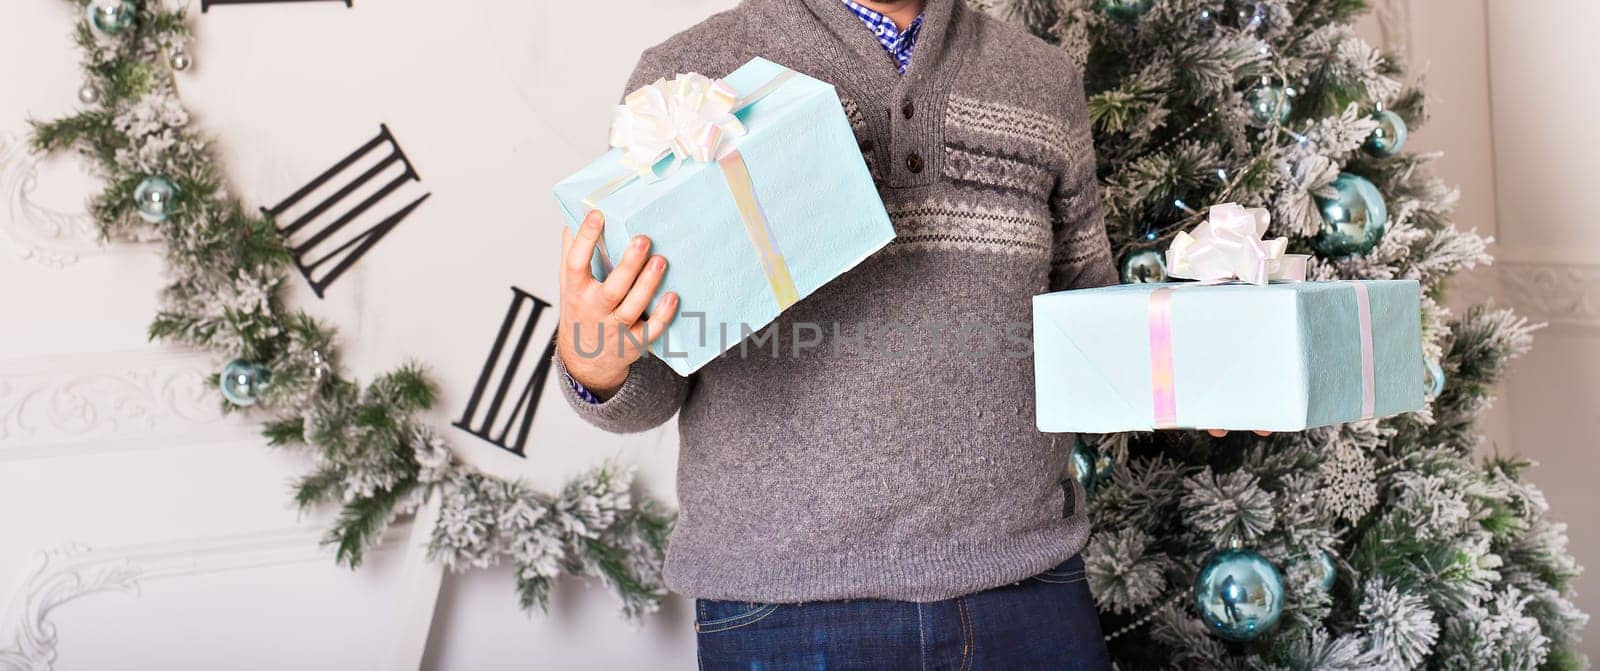 Banner Young man holding gifts in front of Christmas tree copy space by Satura86